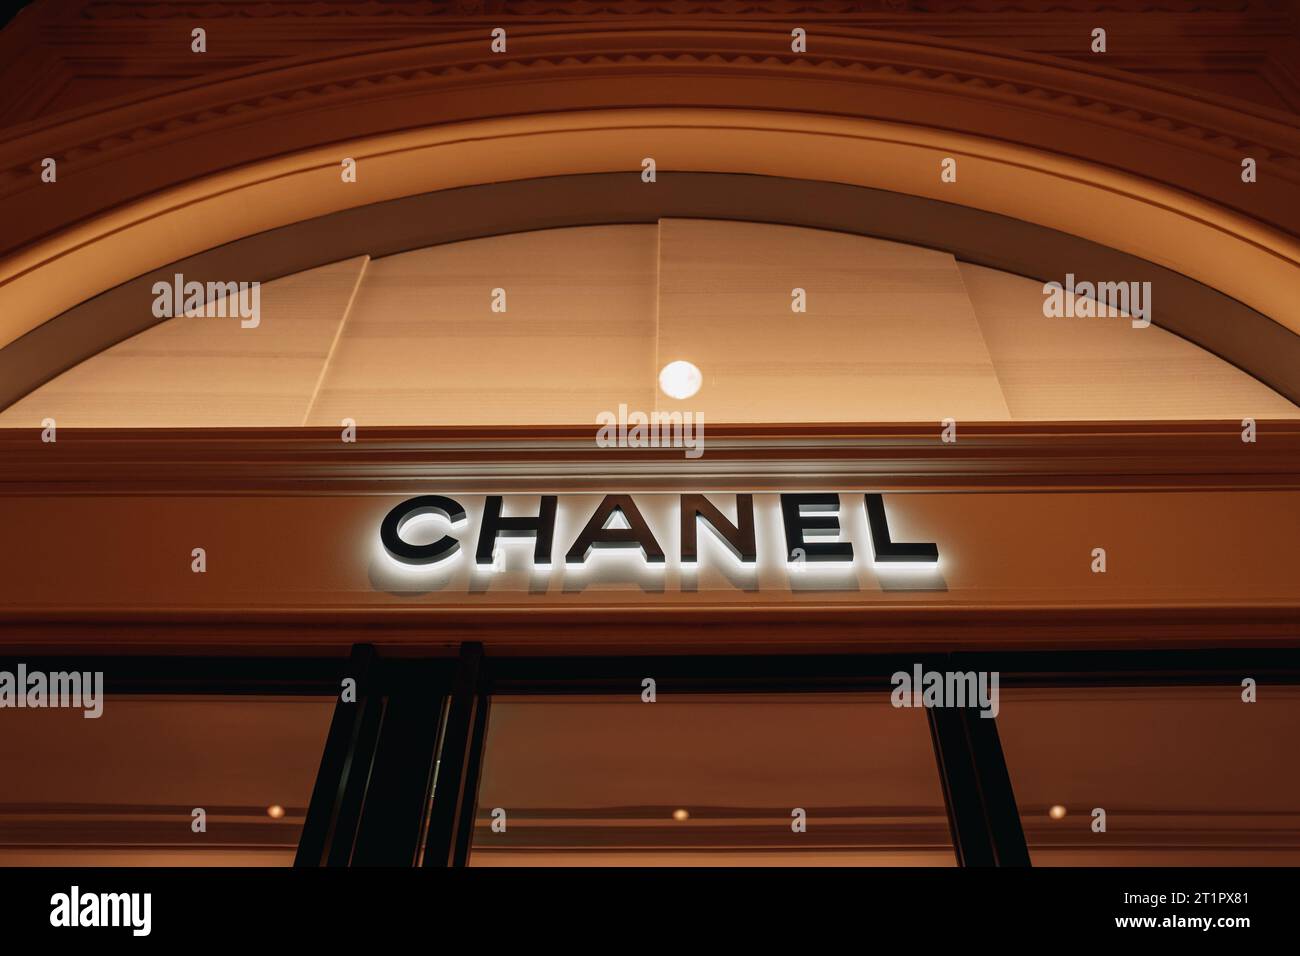 Classic Chanel logotype.Luxury boutique showcase. Chanel is a fashion house founded in 1909 specialized in haute couture goods. Stock Photo